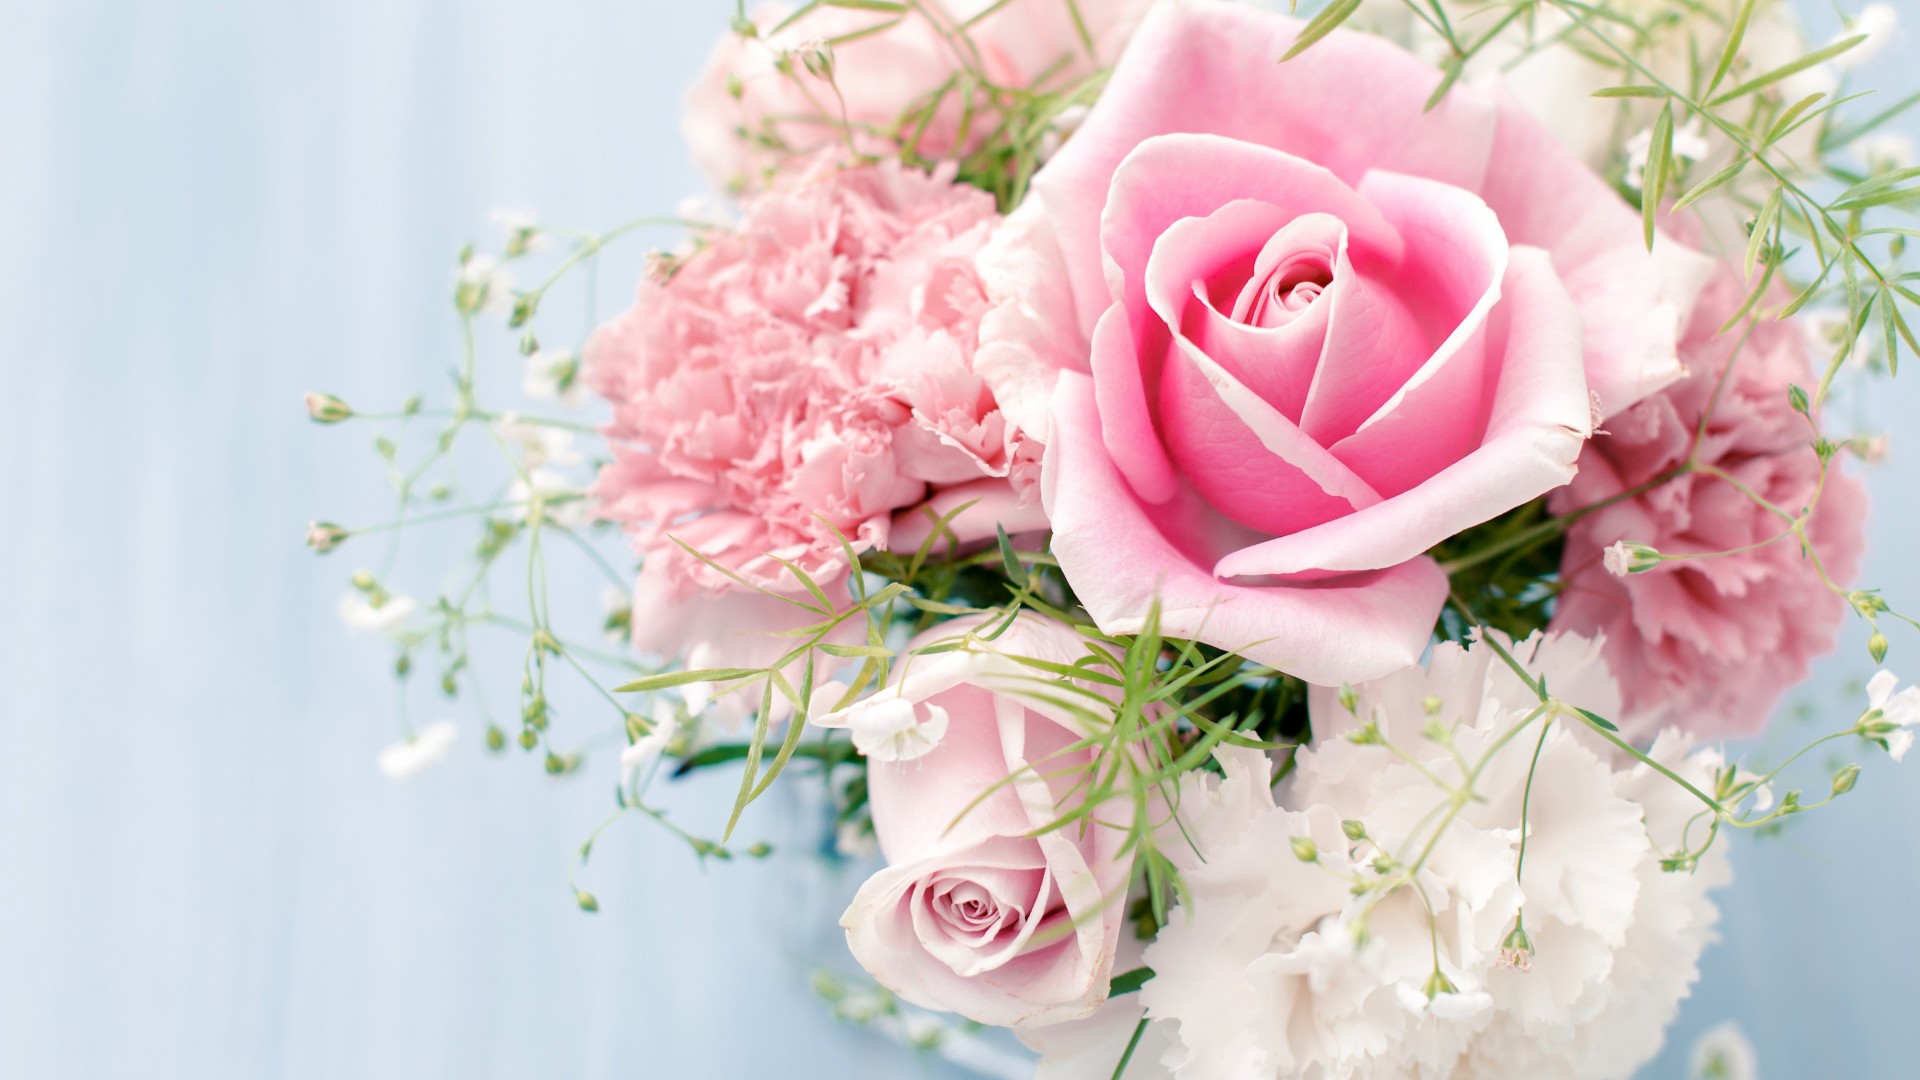 Flowers Image Roses HD Wallpaper And Background Photos